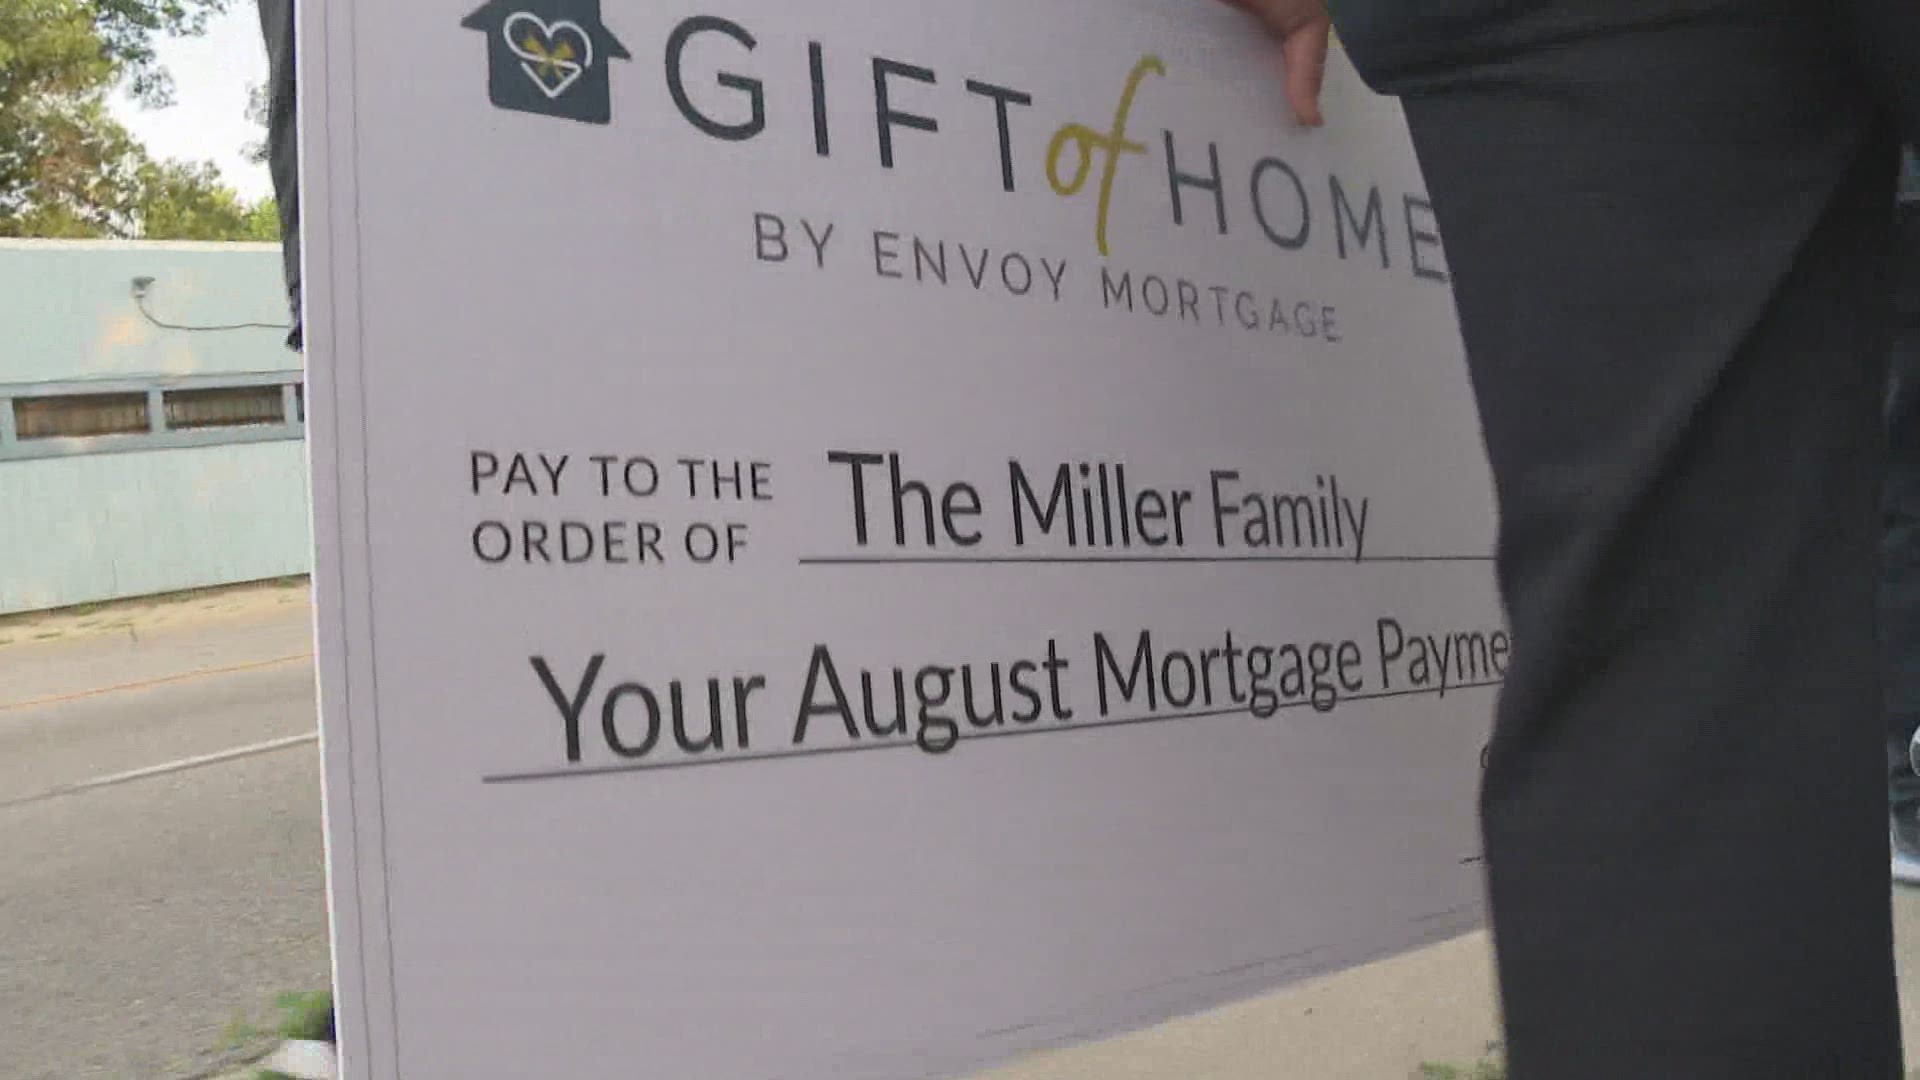 Envoy Mortgage is crisscrossing the country delivering surprises to 50 households.